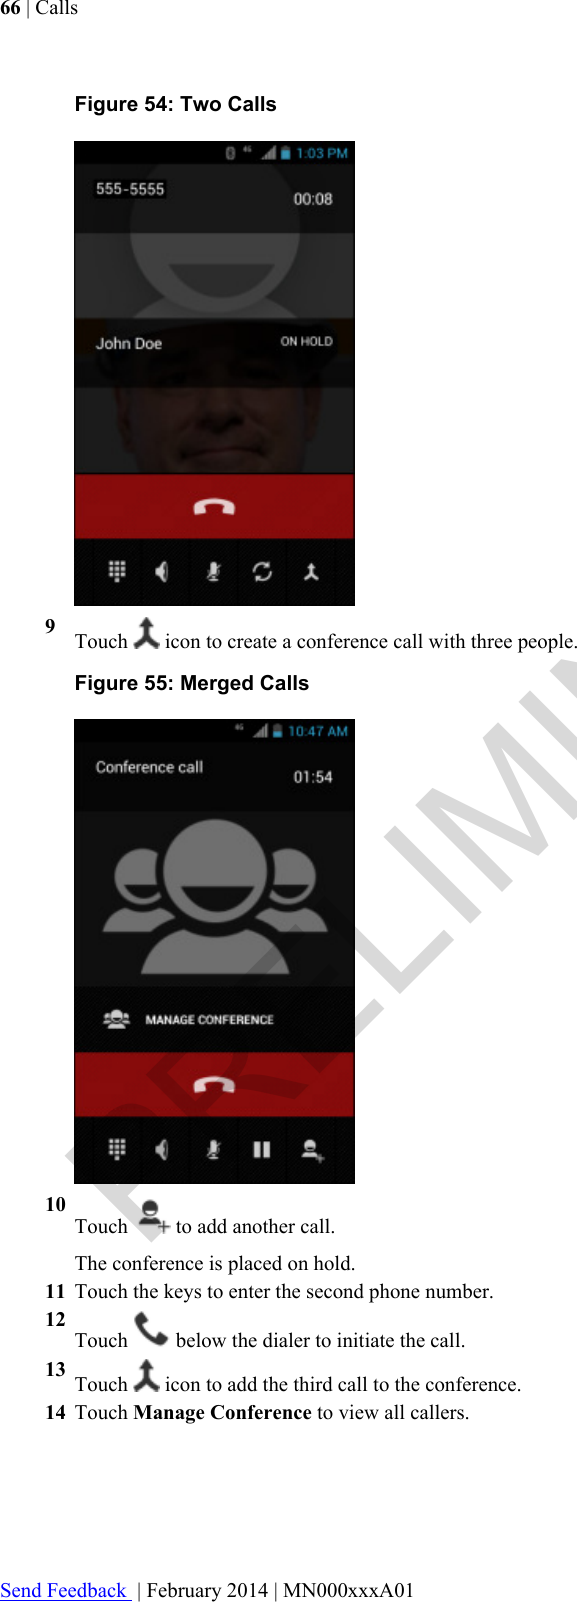 Figure 54: Two Calls9Touch   icon to create a conference call with three people.Figure 55: Merged Calls10Touch   to add another call.The conference is placed on hold.11 Touch the keys to enter the second phone number.12Touch   below the dialer to initiate the call.13 Touch   icon to add the third call to the conference.14 Touch Manage Conference to view all callers.66 | CallsSend Feedback  | February 2014 | MN000xxxA01PRELIMINARY